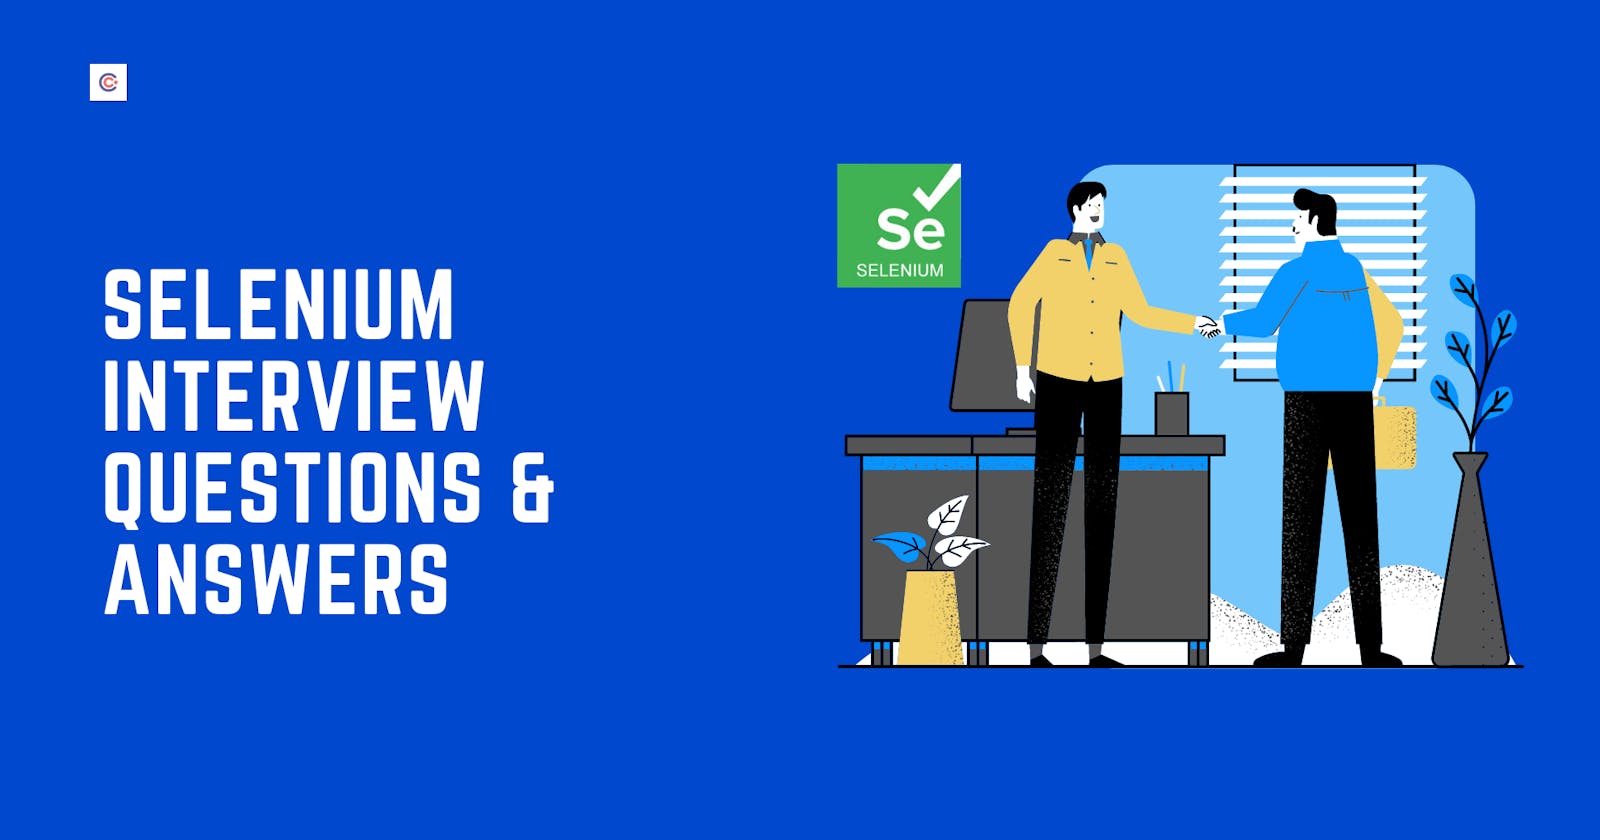 50 Selenium Interview Questions To Ace Your Next Interview